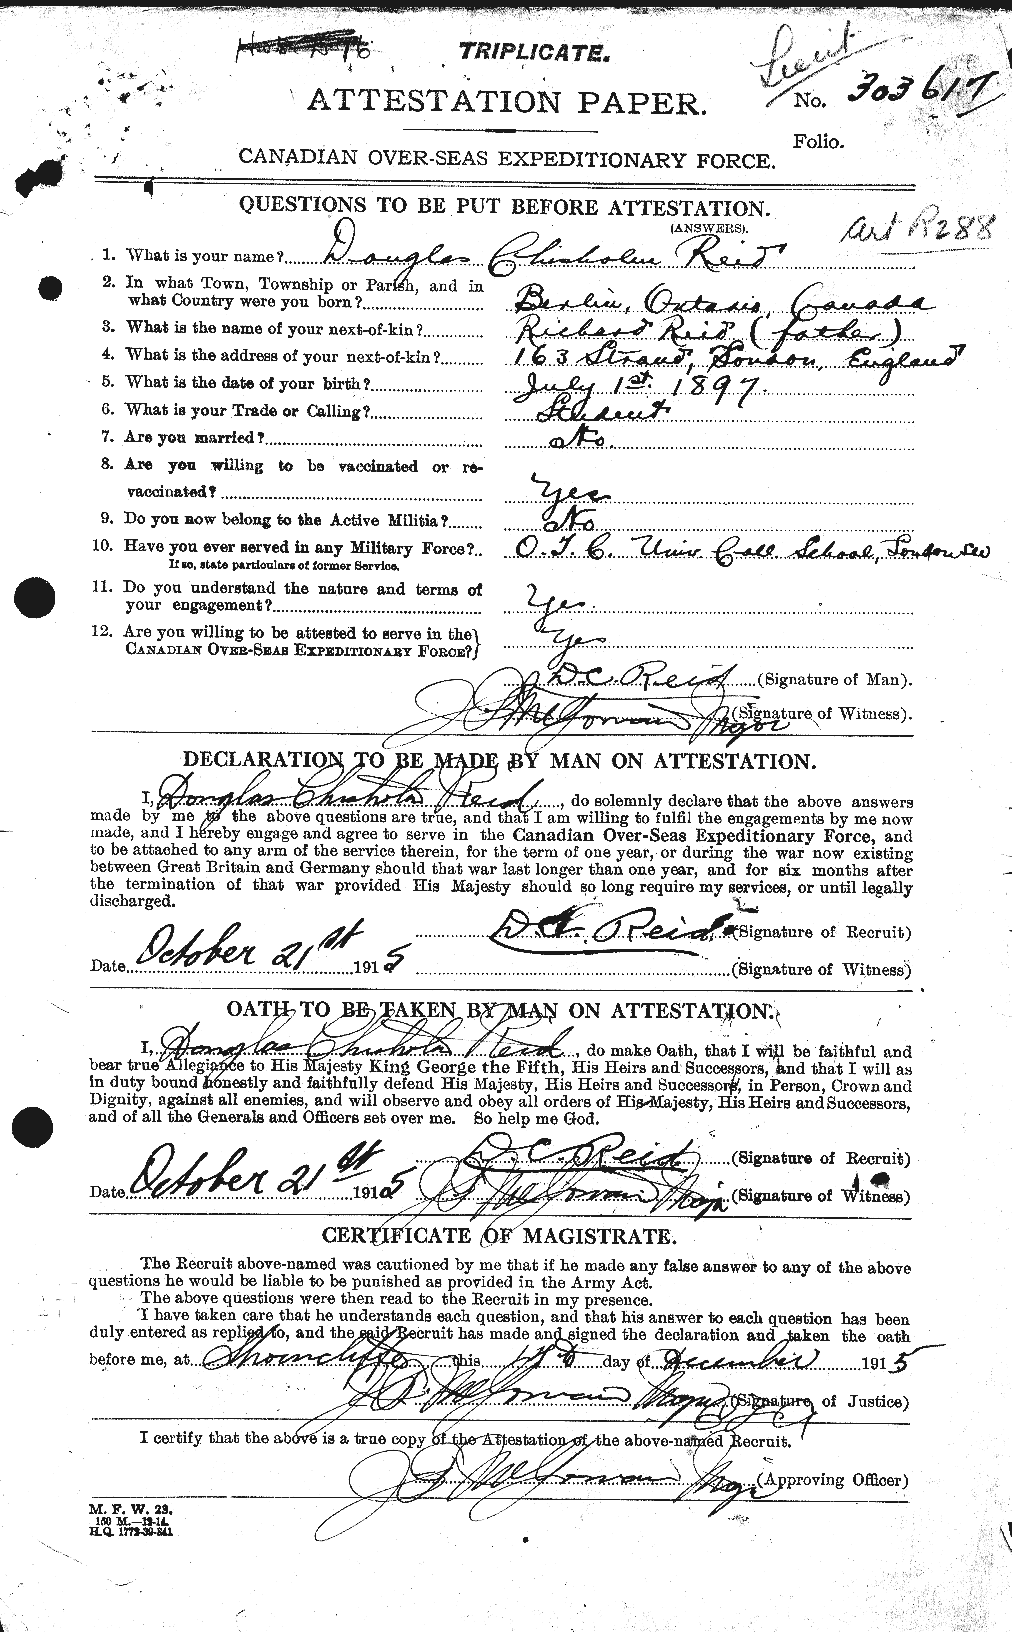 Personnel Records of the First World War - CEF 597968a